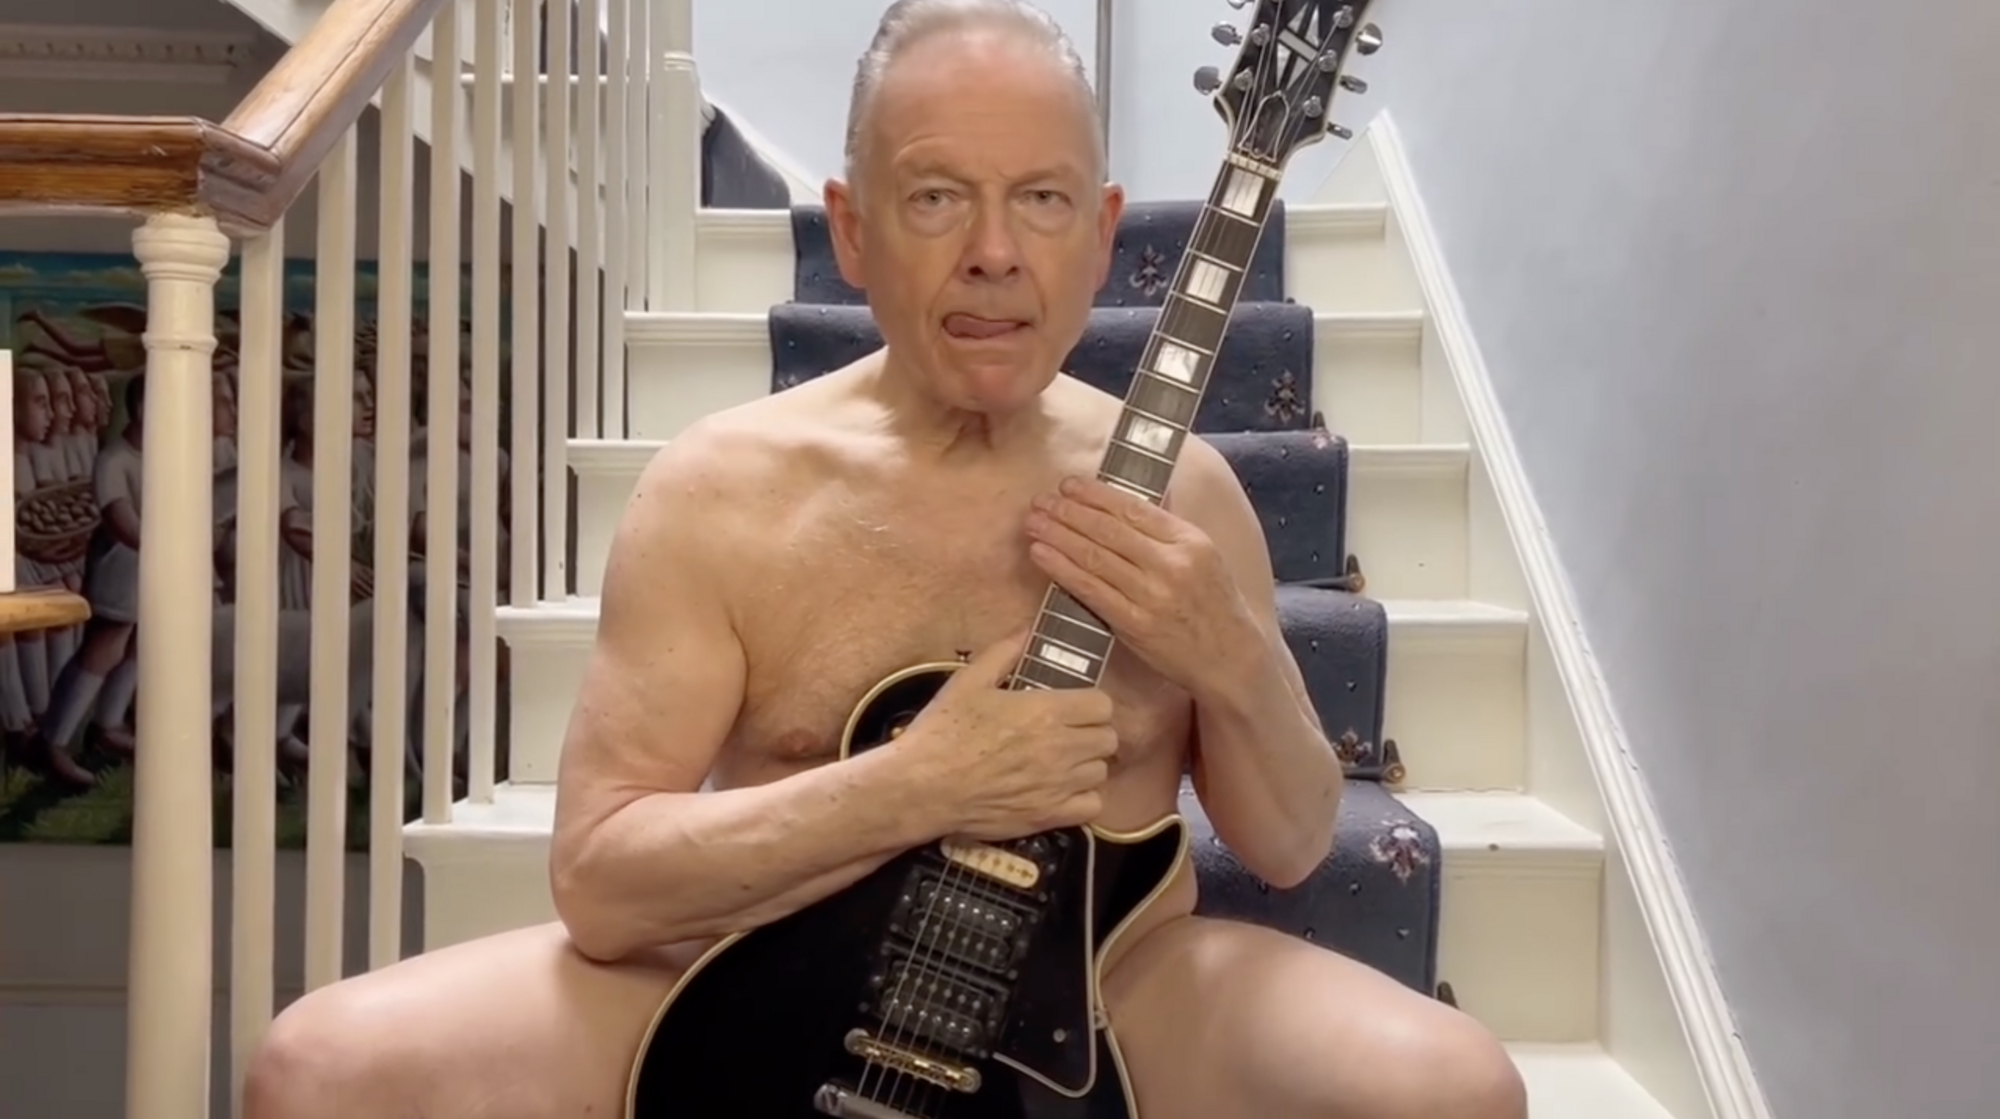 The 77-year-old founder of the band King Crimson embarrassed fans with a video in which he appeared completely naked